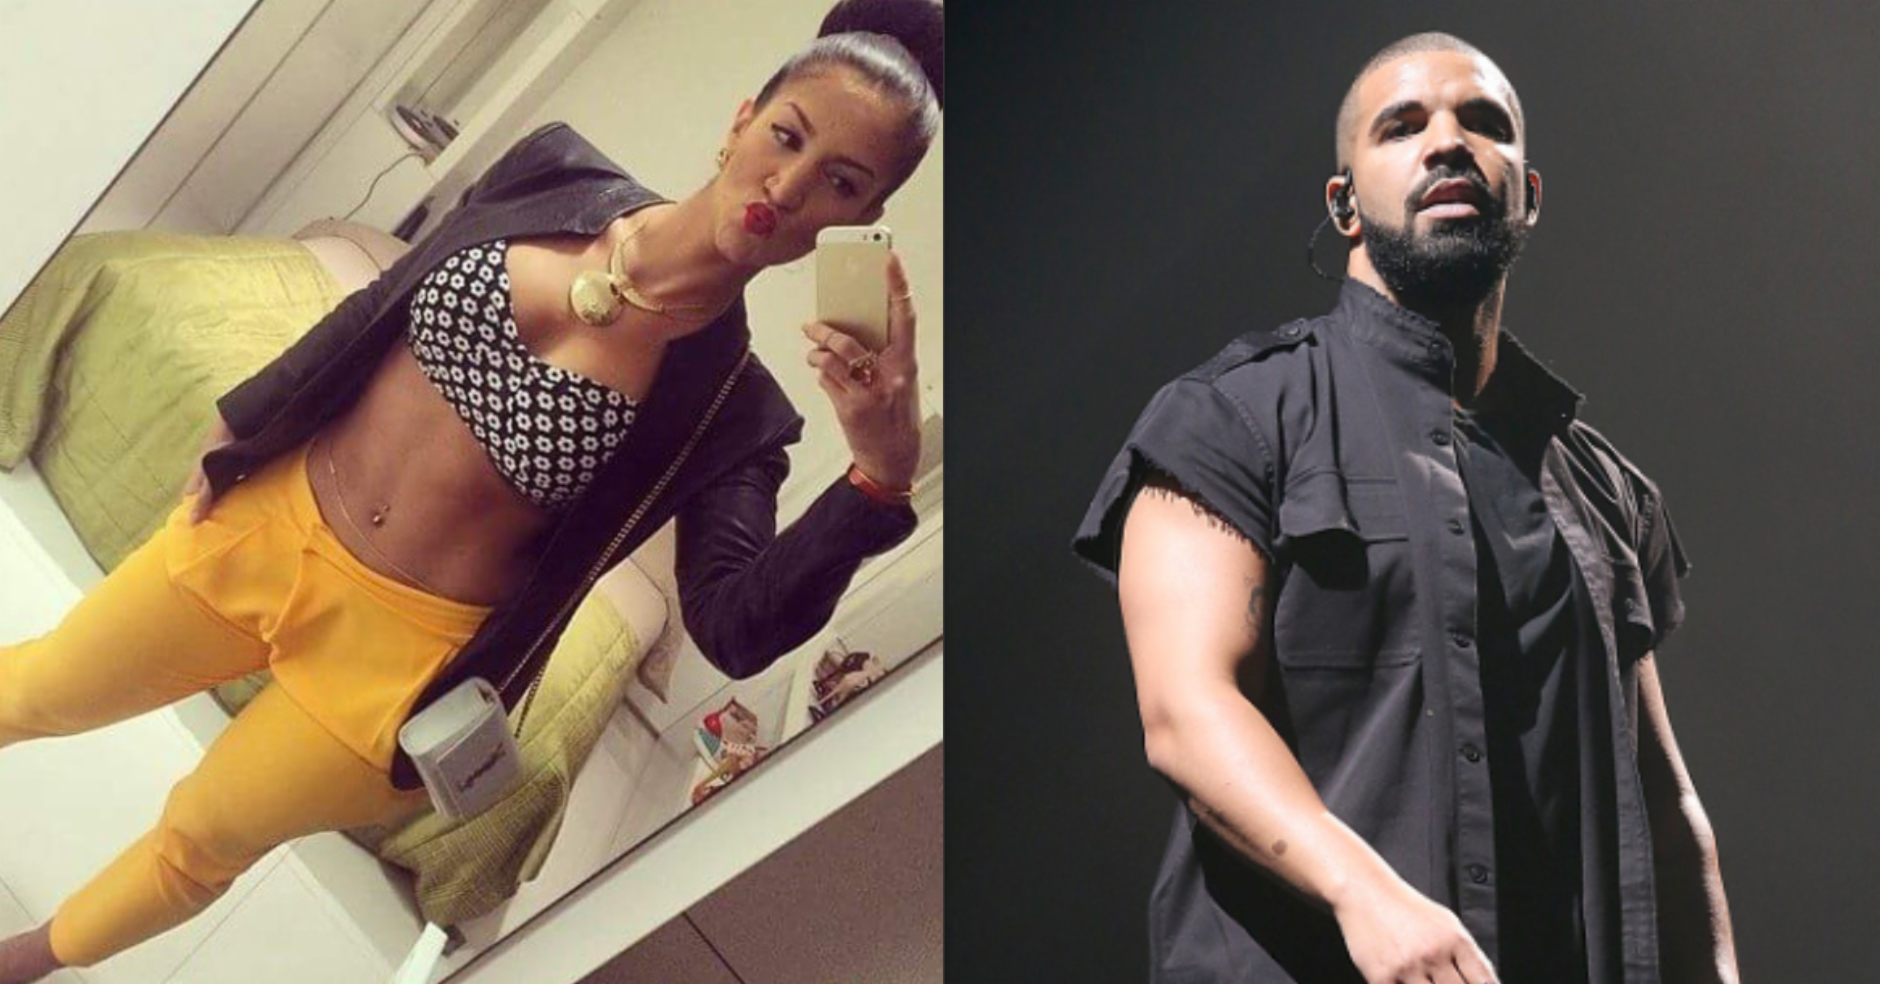 Drake Porn Star - Drake Allegedly Impregnated a Former Porn Star, Then Told Her To Get Her an  Abortion - Maxim